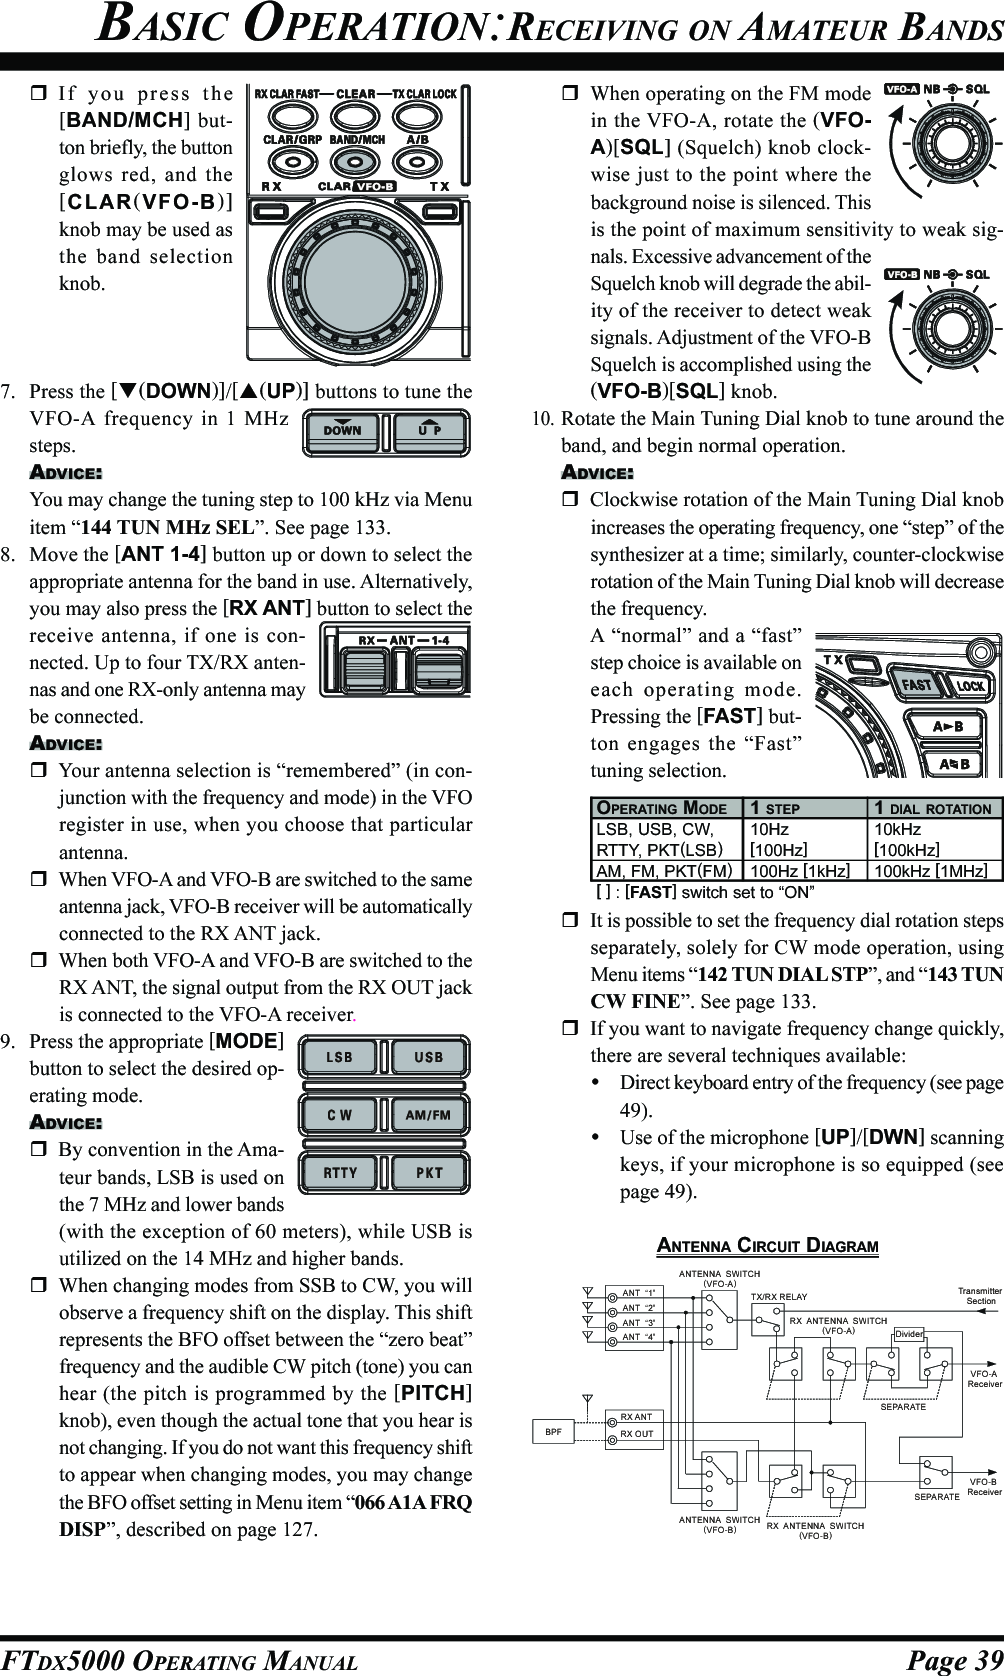 Page 39FTDX5000 OPERATING MANUALIf you press the[BAND/MCH] but-ton briefly, the buttonglows red, and the[CLAR(VFO-B)]knob may be used asthe band selectionknob.7. Press the [(DOWN)]/[(UP)] buttons to tune theVFO-A frequency in 1 MHzsteps.ADVICE:You may change the tuning step to 100 kHz via Menuitem “144 TUN MHz SEL”. See page 133.8. Move the [ANT 1-4] button up or down to select theappropriate antenna for the band in use. Alternatively,you may also press the [RX ANT] button to select thereceive antenna, if one is con-nected. Up to four TX/RX anten-nas and one RX-only antenna maybe connected.ADVICE:Your antenna selection is “remembered” (in con-junction with the frequency and mode) in the VFOregister in use, when you choose that particularantenna.When VFO-A and VFO-B are switched to the sameantenna jack, VFO-B receiver will be automaticallyconnected to the RX ANT jack.When both VFO-A and VFO-B are switched to theRX ANT, the signal output from the RX OUT jackis connected to the VFO-A receiver.9. Press the appropriate [MODE]button to select the desired op-erating mode.ADVICE:By convention in the Ama-teur bands, LSB is used onthe 7 MHz and lower bands(with the exception of 60 meters), while USB isutilized on the 14 MHz and higher bands.When changing modes from SSB to CW, you willobserve a frequency shift on the display. This shiftrepresents the BFO offset between the “zero beat”frequency and the audible CW pitch (tone) you canhear (the pitch is programmed by the [PITCH]knob), even though the actual tone that you hear isnot changing. If you do not want this frequency shiftto appear when changing modes, you may changethe BFO offset setting in Menu item “066 A1A FRQDISP”, described on page 127.When operating on the FM modein the VFO-A, rotate the (VFO-A)[SQL] (Squelch) knob clock-wise just to the point where thebackground noise is silenced. Thisis the point of maximum sensitivity to weak sig-nals. Excessive advancement of theSquelch knob will degrade the abil-ity of the receiver to detect weaksignals. Adjustment of the VFO-BSquelch is accomplished using the(VFO-B)[SQL] knob.10.Rotate the Main Tuning Dial knob to tune around theband, and begin normal operation.ADVICE:Clockwise rotation of the Main Tuning Dial knobincreases the operating frequency, one “step” of thesynthesizer at a time; similarly, counter-clockwiserotation of the Main Tuning Dial knob will decreasethe frequency.A “normal” and a “fast”step choice is available oneach operating mode.Pressing the [FAST] but-ton engages the “Fast”tuning selection.BASIC OPERATION:RECEIVING ON AMATEUR BANDSOPERATING MODE 1 STEP 1 DIAL ROTATIONLSB, USB, CW, 10Hz 10kHzRTTY, PKT(LSB)[100Hz][100kHz]AM, FM, PKT(FM)100Hz [1kHz]100kHz [1MHz][ ] : [FAST] switch set to “ON”It is possible to set the frequency dial rotation stepsseparately, solely for CW mode operation, usingMenu items “142 TUN DIAL STP”, and “143 TUNCW FINE”. See page 133.If you want to navigate frequency change quickly,there are several techniques available:Direct keyboard entry of the frequency (see page49).Use of the microphone [UP]/[DWN] scanningkeys, if your microphone is so equipped (seepage 49).ANTENNA  SWITCH(VFO-A)ANTENNA  SWITCH(VFO-B)RX  ANTENNA  SWITCH(VFO-B)RX  ANTENNA  SWITCH(VFO-A)TX/RX RELAY Transmitter SectionVFO-A ReceiverVFO-B ReceiverBPFANT  “1”ANT  “3”ANT  “2”ANT  “4”RX ANTRX OUTDividerSEPARATESEPARATEANTENNA CIRCUIT DIAGRAM